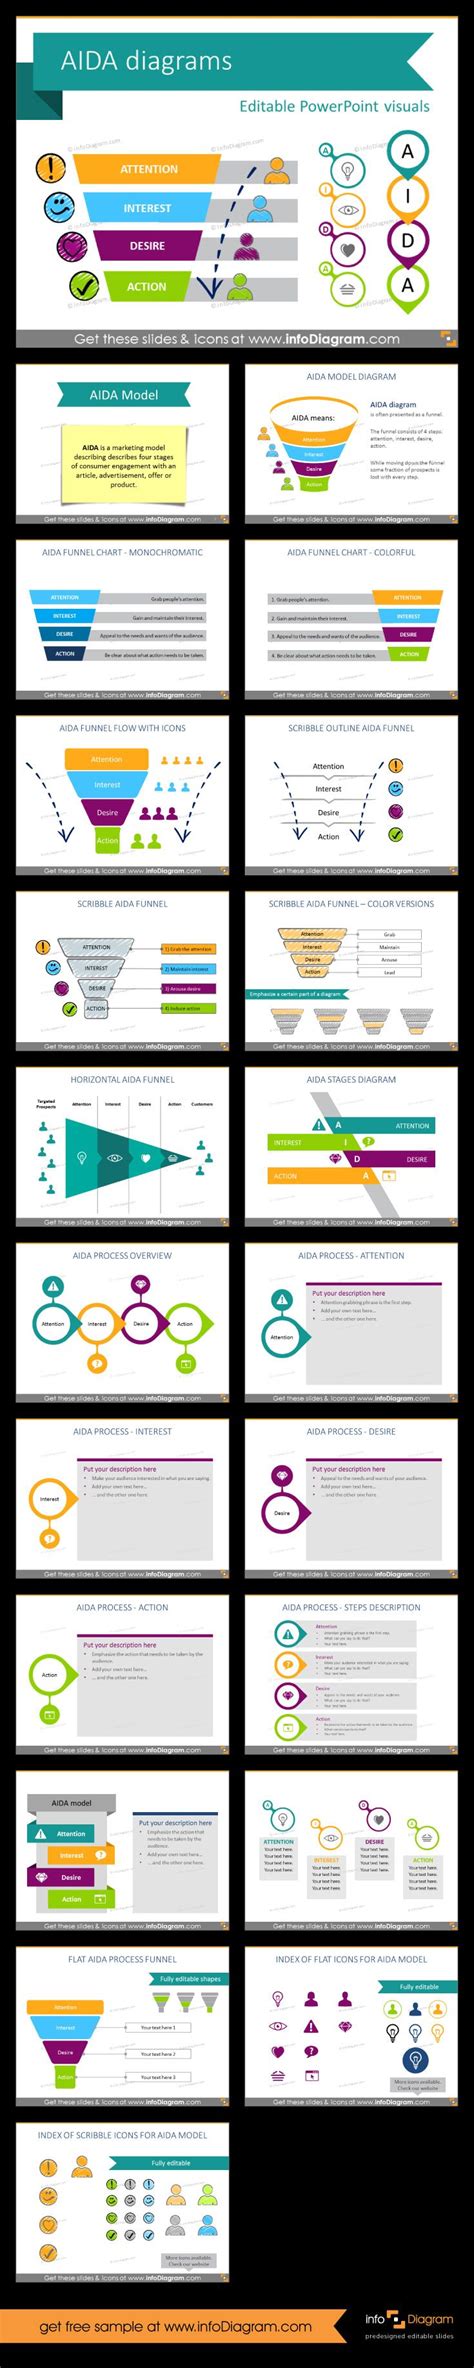 14 Creative Aida Model Diagrams For Ppt Presentations Attention